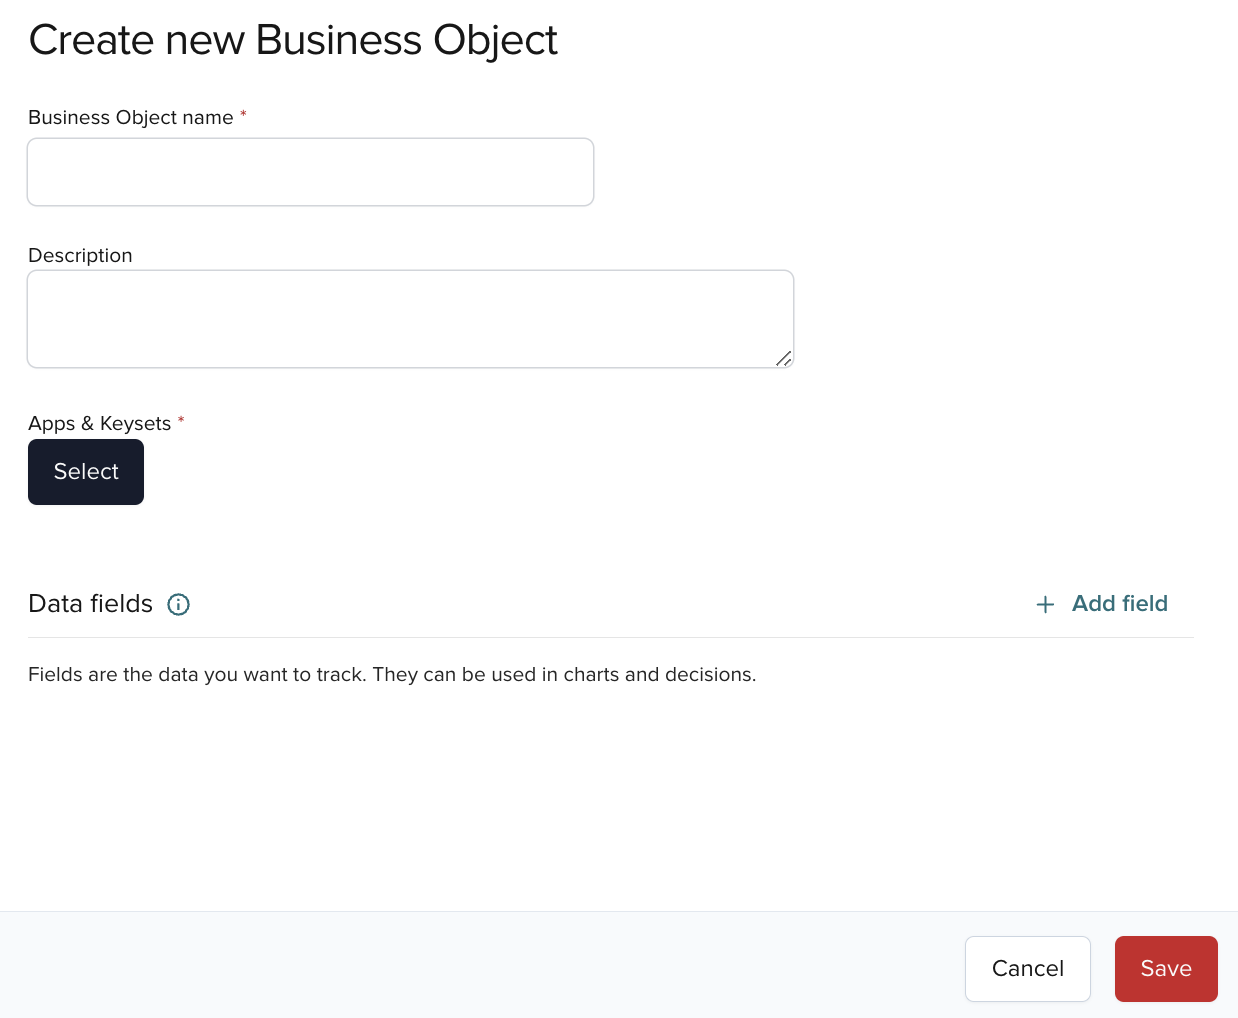 Create new Business Object